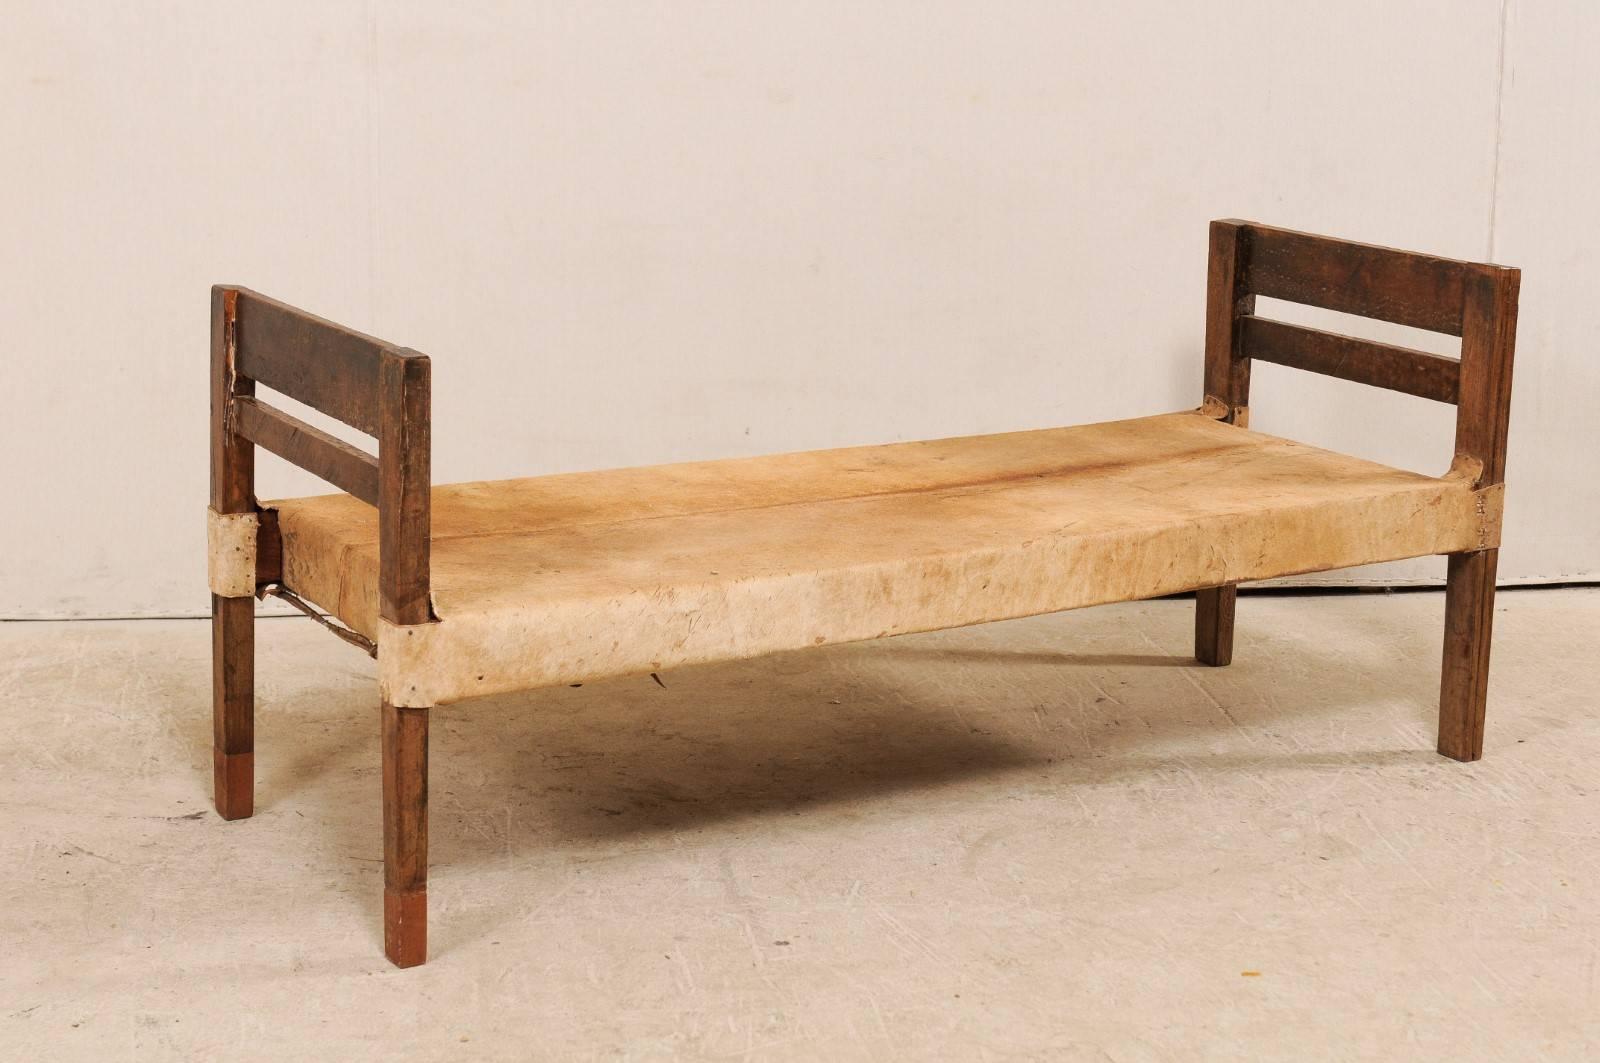 A Brazilian mid-20th century single daybed with cowhide and wood frame. This vintage Brazilian daybed features wooden slatted foot and headboards, which extend to make up the square shaped legs. The bed is upholstered in a honey colored cowhide with